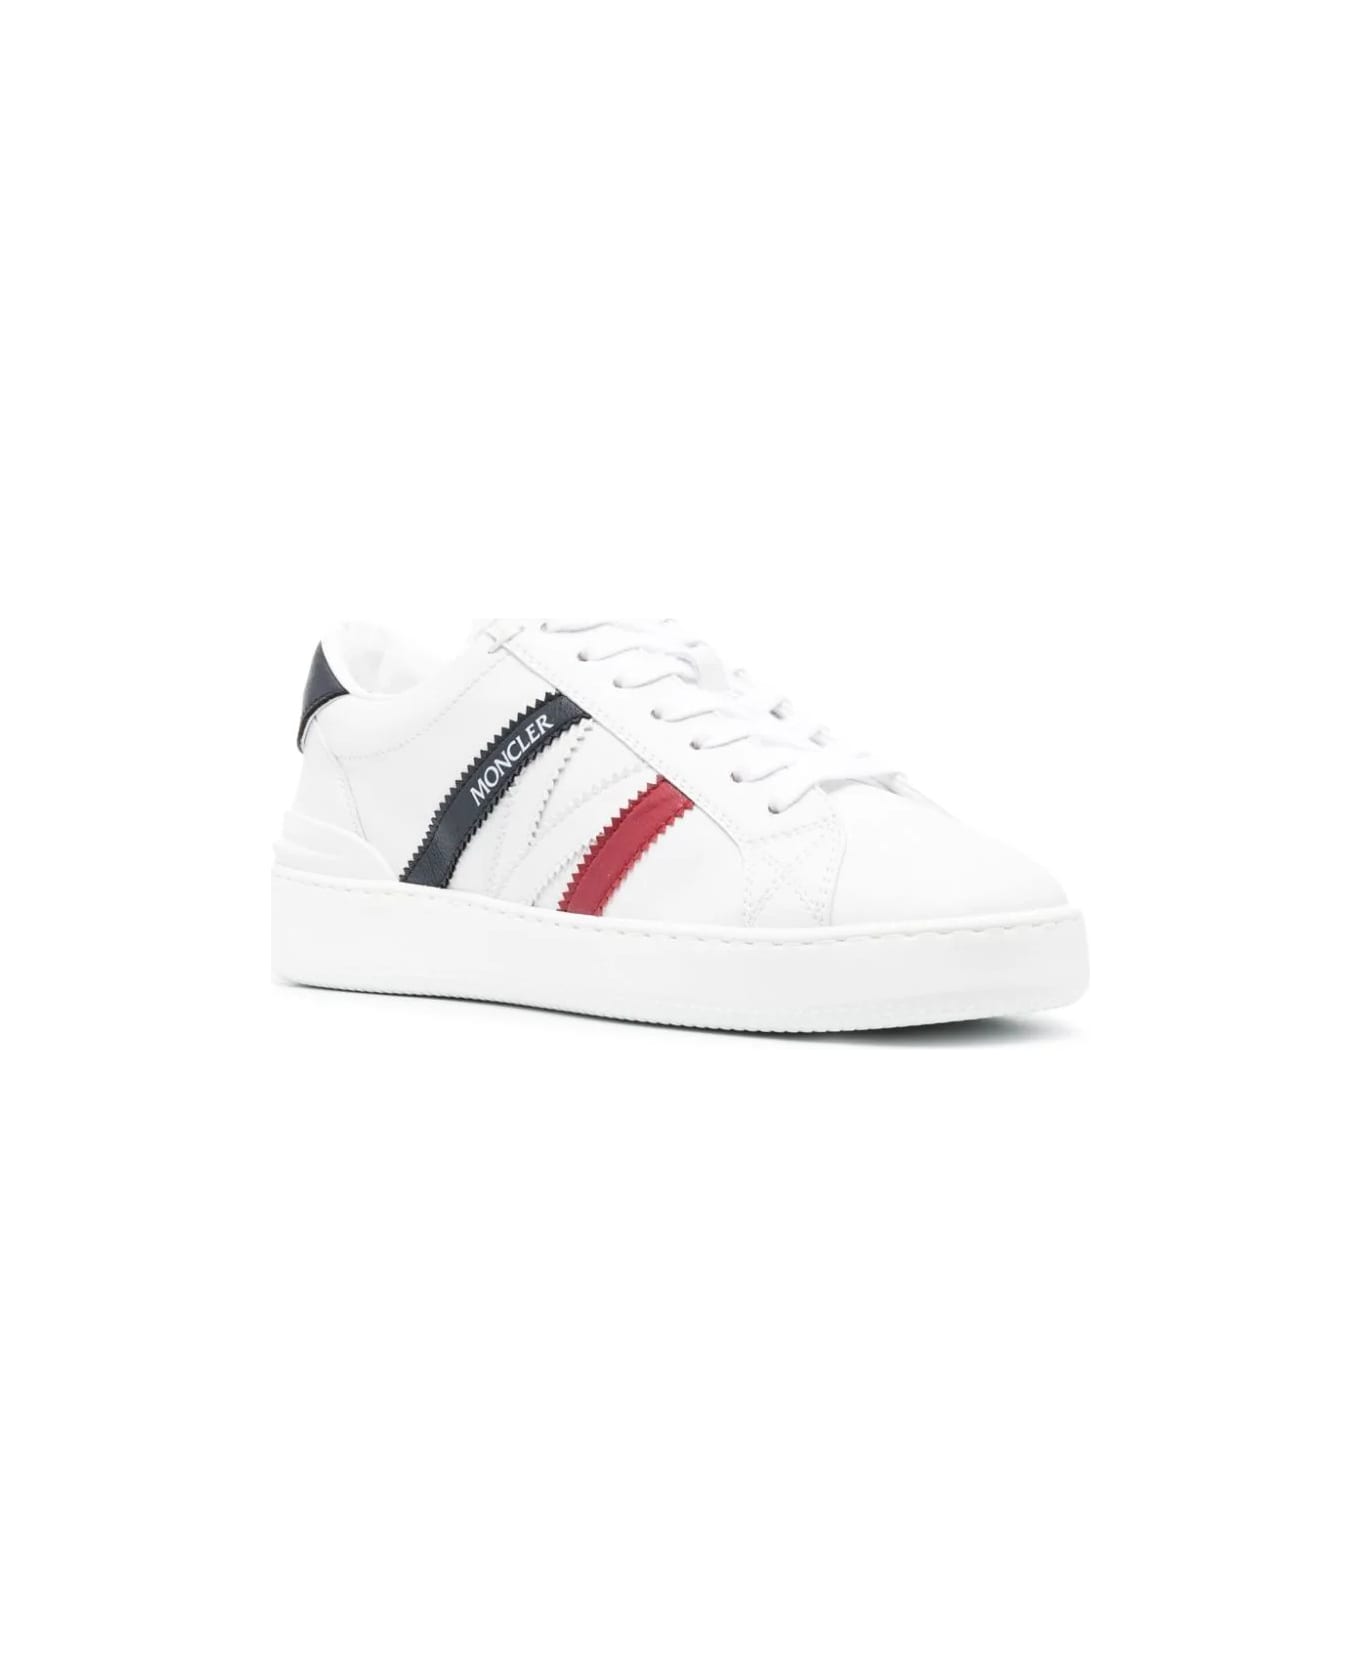 Moncler Monaco M Sneakers In White, Blue And Red - White